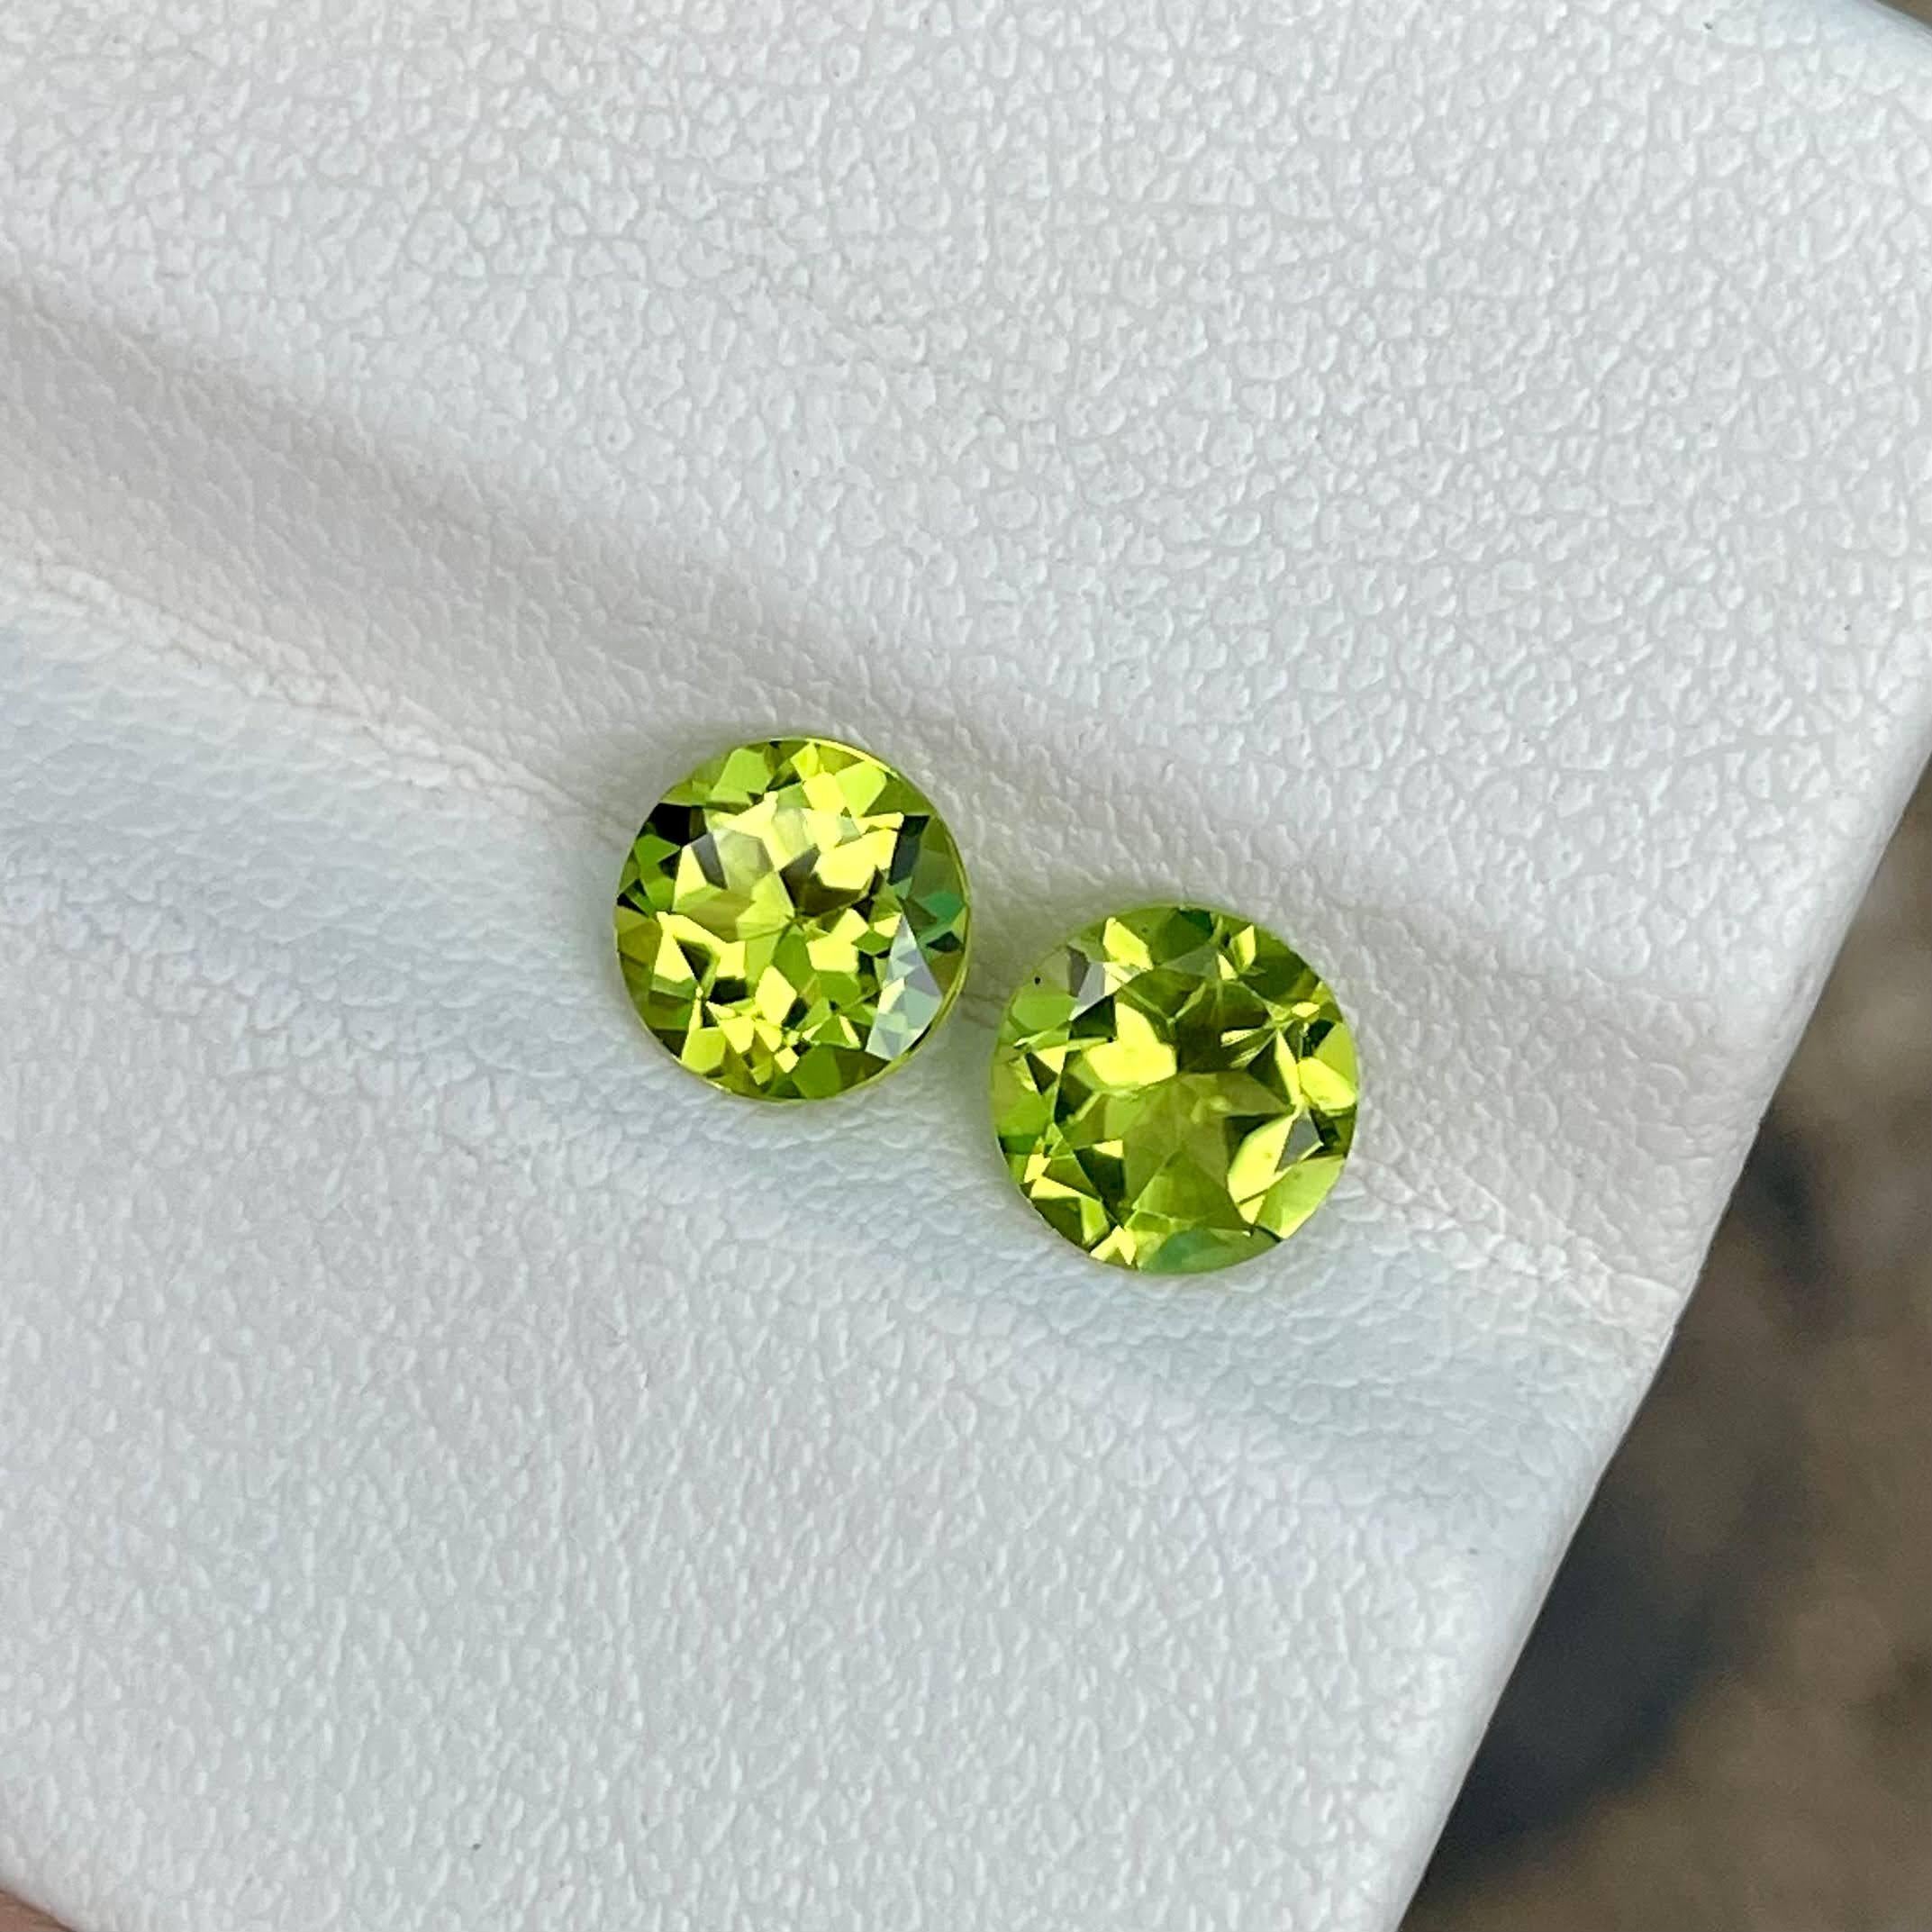 Weight 1.90 carats 
Dimensions 6.0x6.0x4.0 mm
Treatment none 
Origin Pakistan 
Clarity eye clean 
piece 3




Behold the exquisite allure of this Green Peridot Pair, a dazzling manifestation of nature's beauty hailing from the rich gemstone deposits